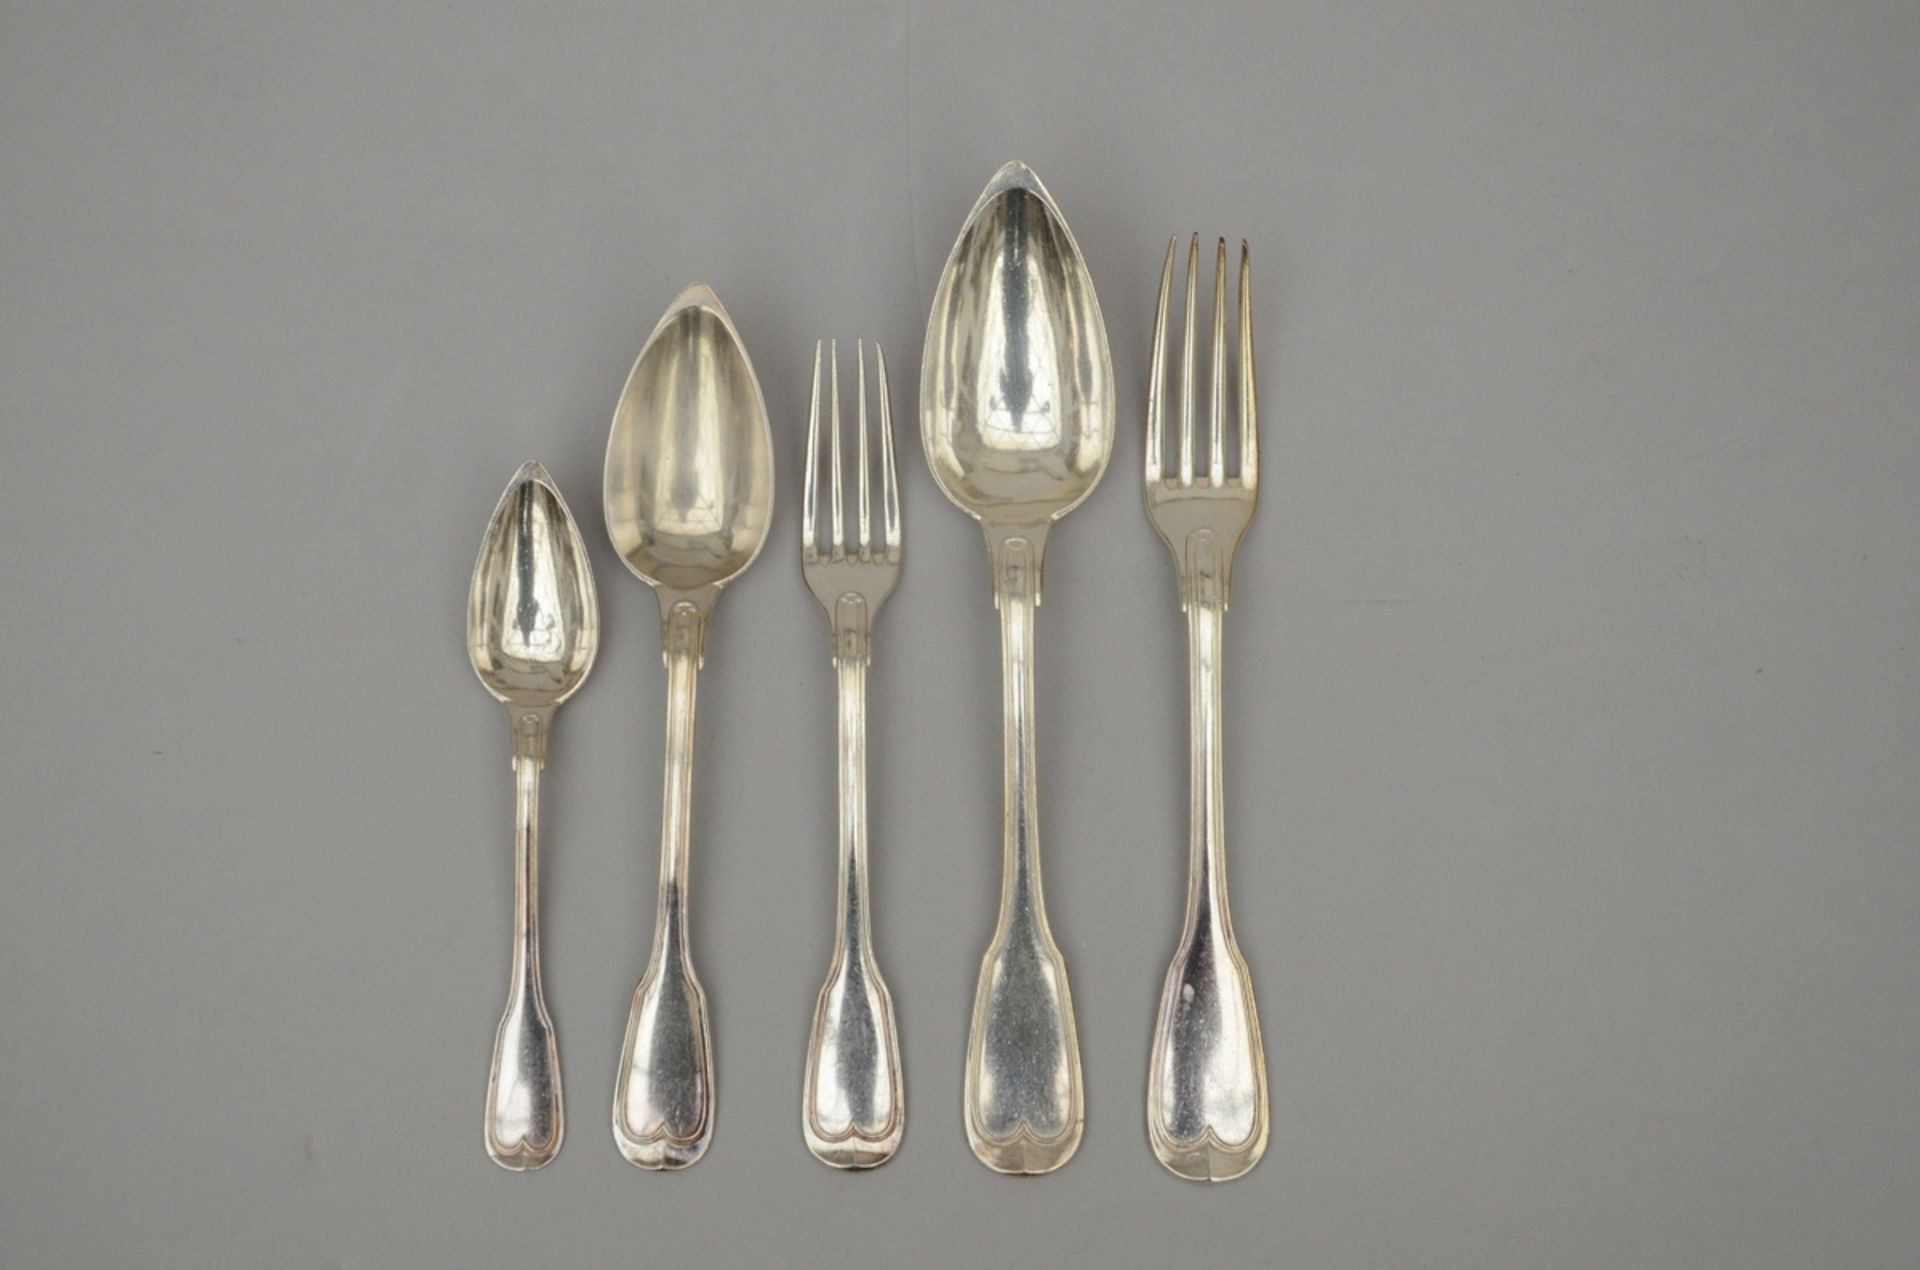 Part of a silver cutlery set 19th century - Image 2 of 4